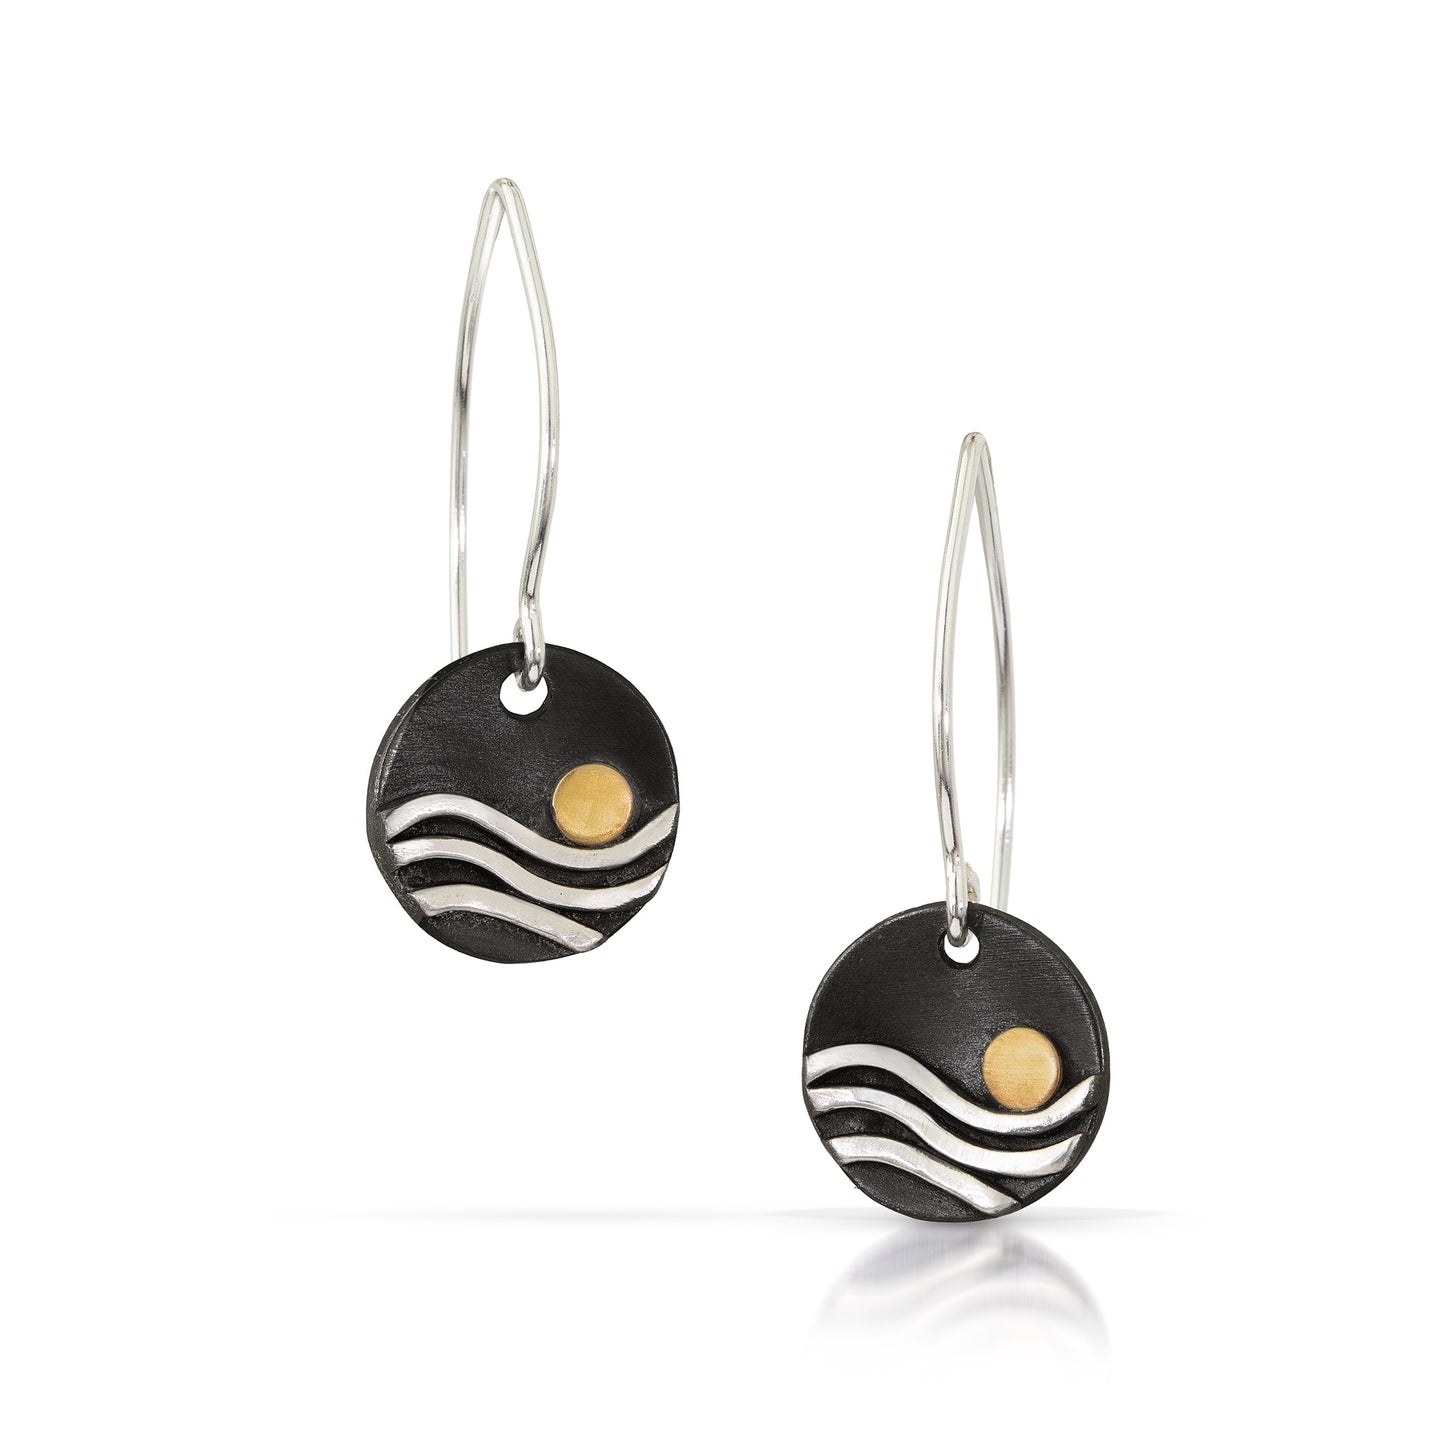 Silver Wave Earrings with gold Moons by Jen Lesea Designs